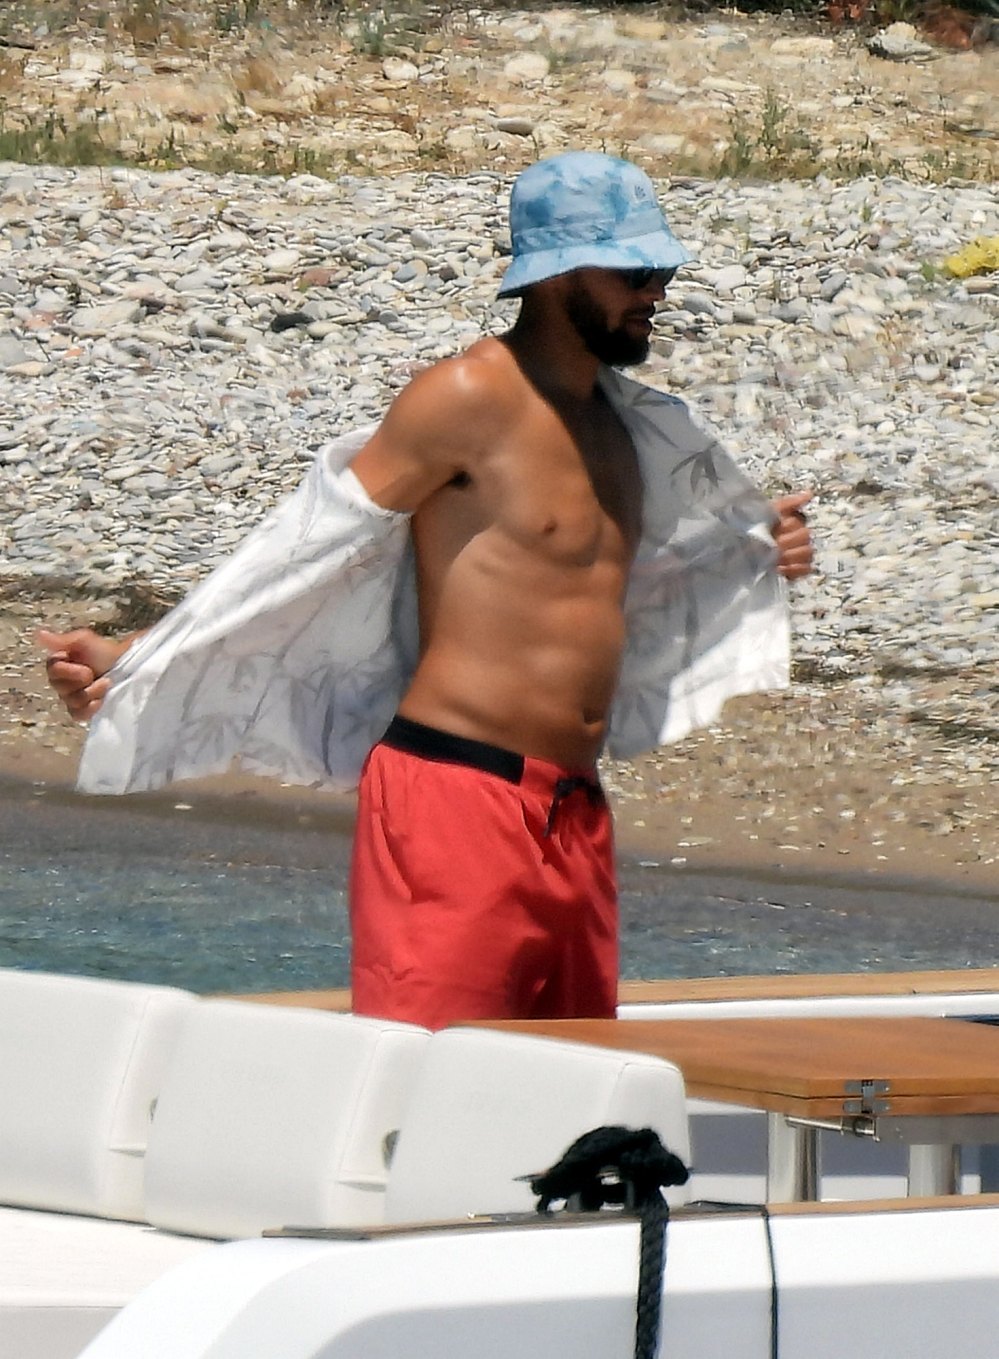 Stephen Curry Goes Shirtless On Vacation With Wife Ayesha Curry